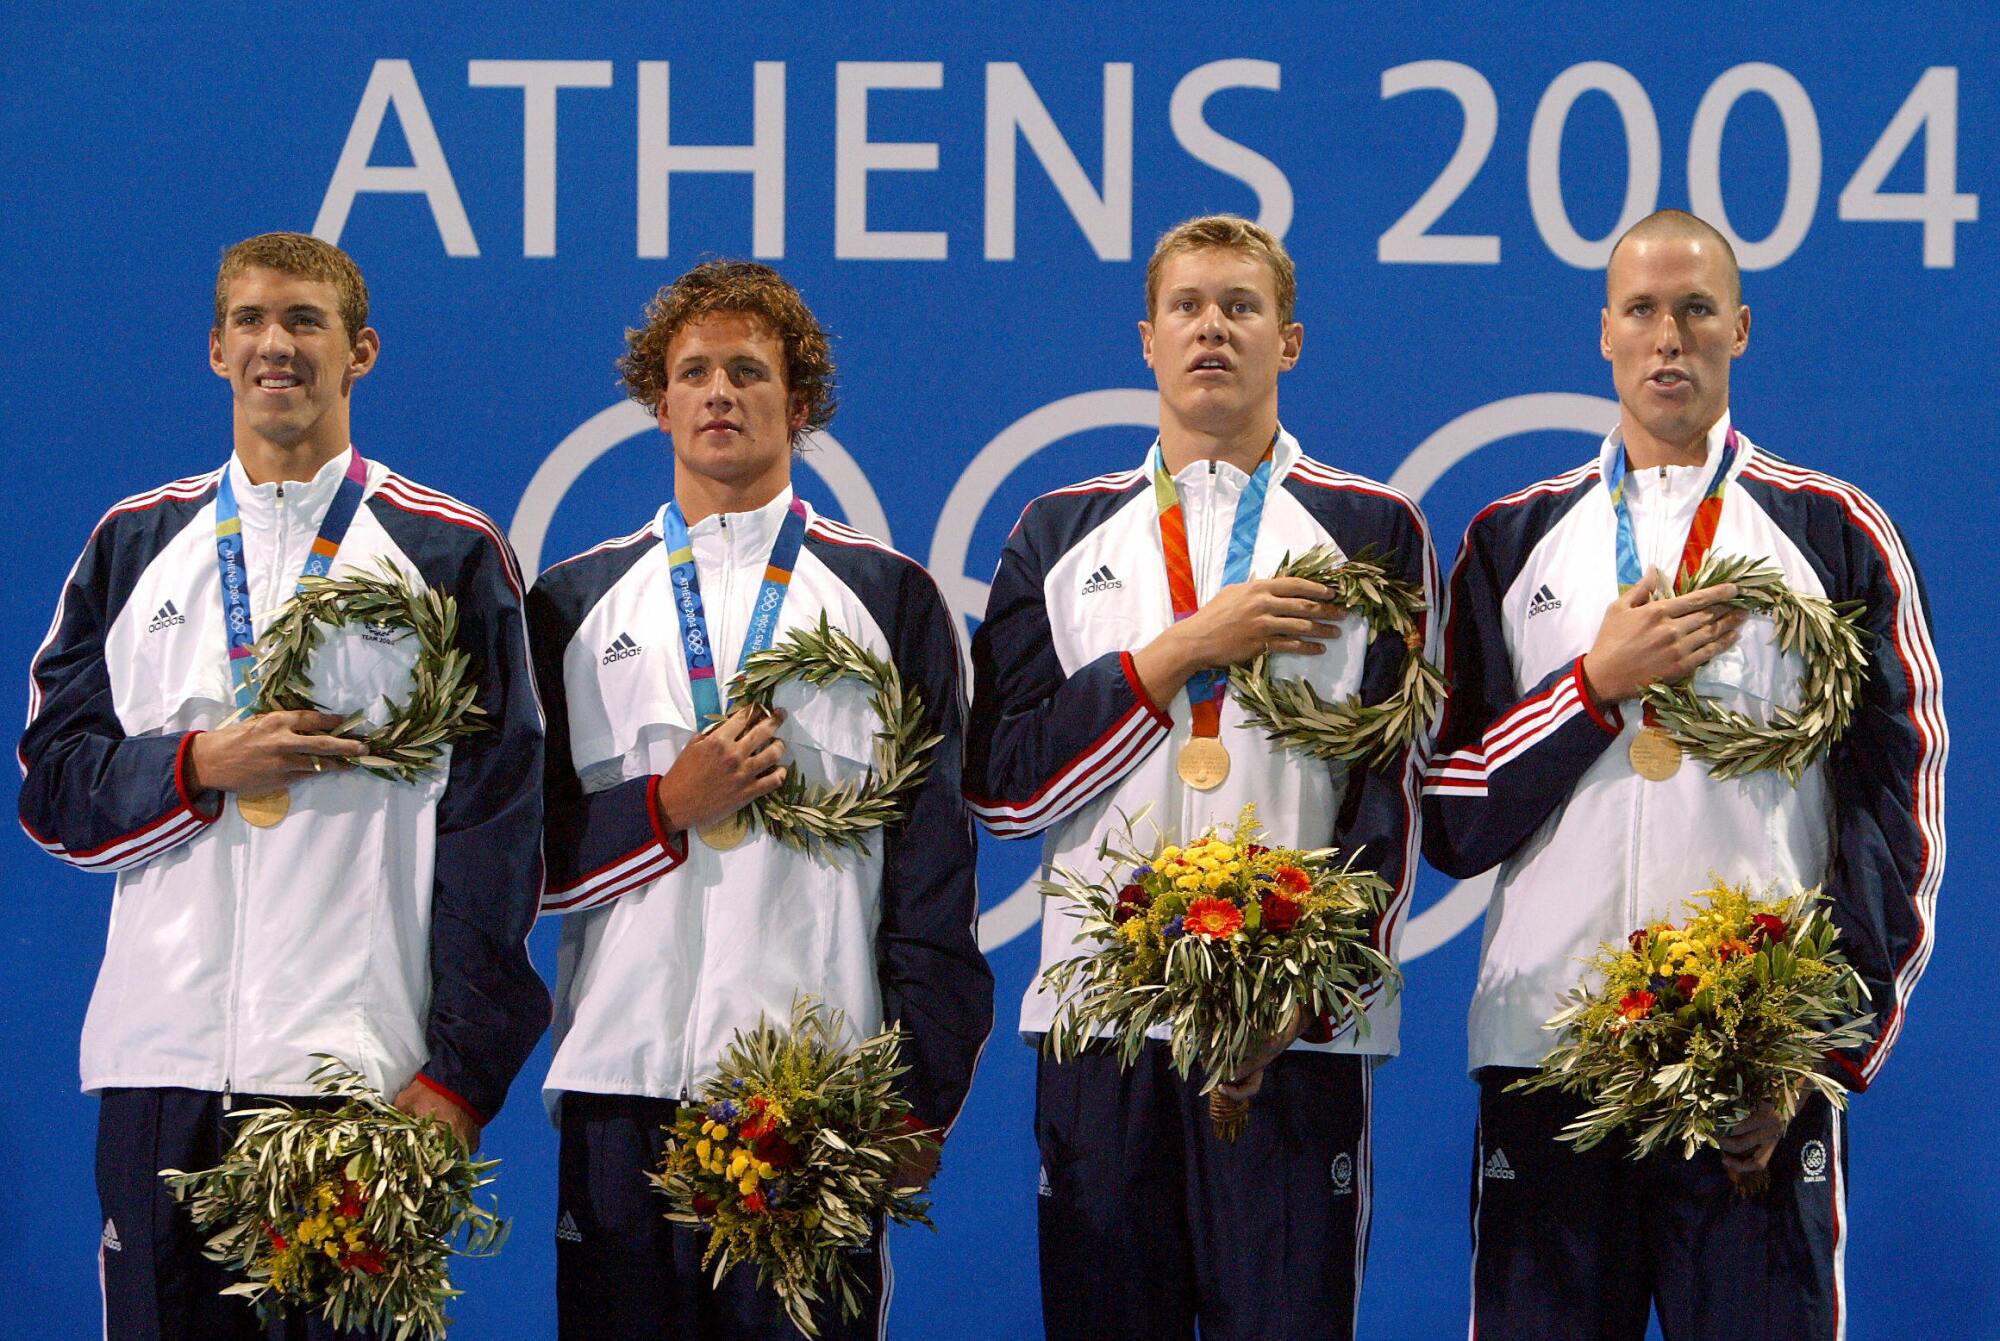 Members of the U.S. men's relay team on a victory podium before a sign that says "Athens 2004"